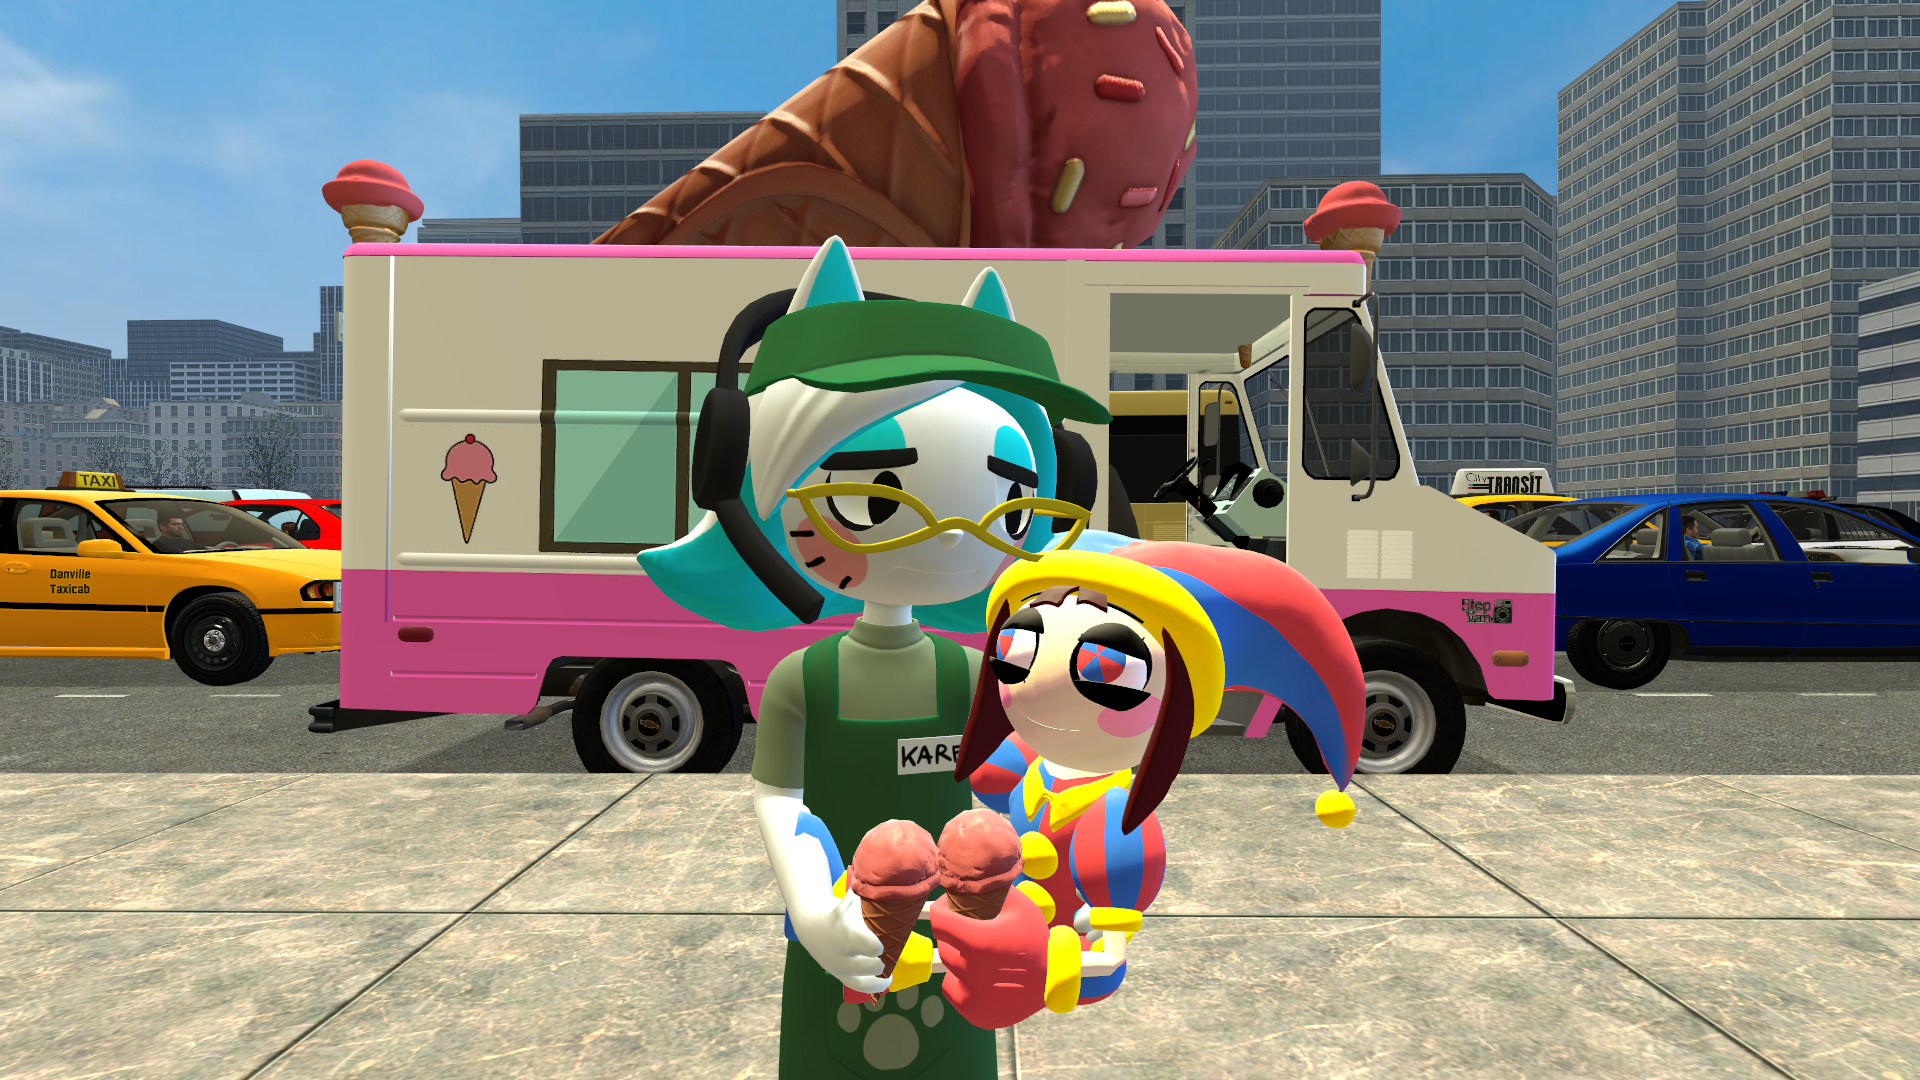 Me as Karen the and My Jester Girl Pomni are having Ice Cream in Danville (Credit to chip599XX [SMG4 and The Amazing Digital Circus Crossover])